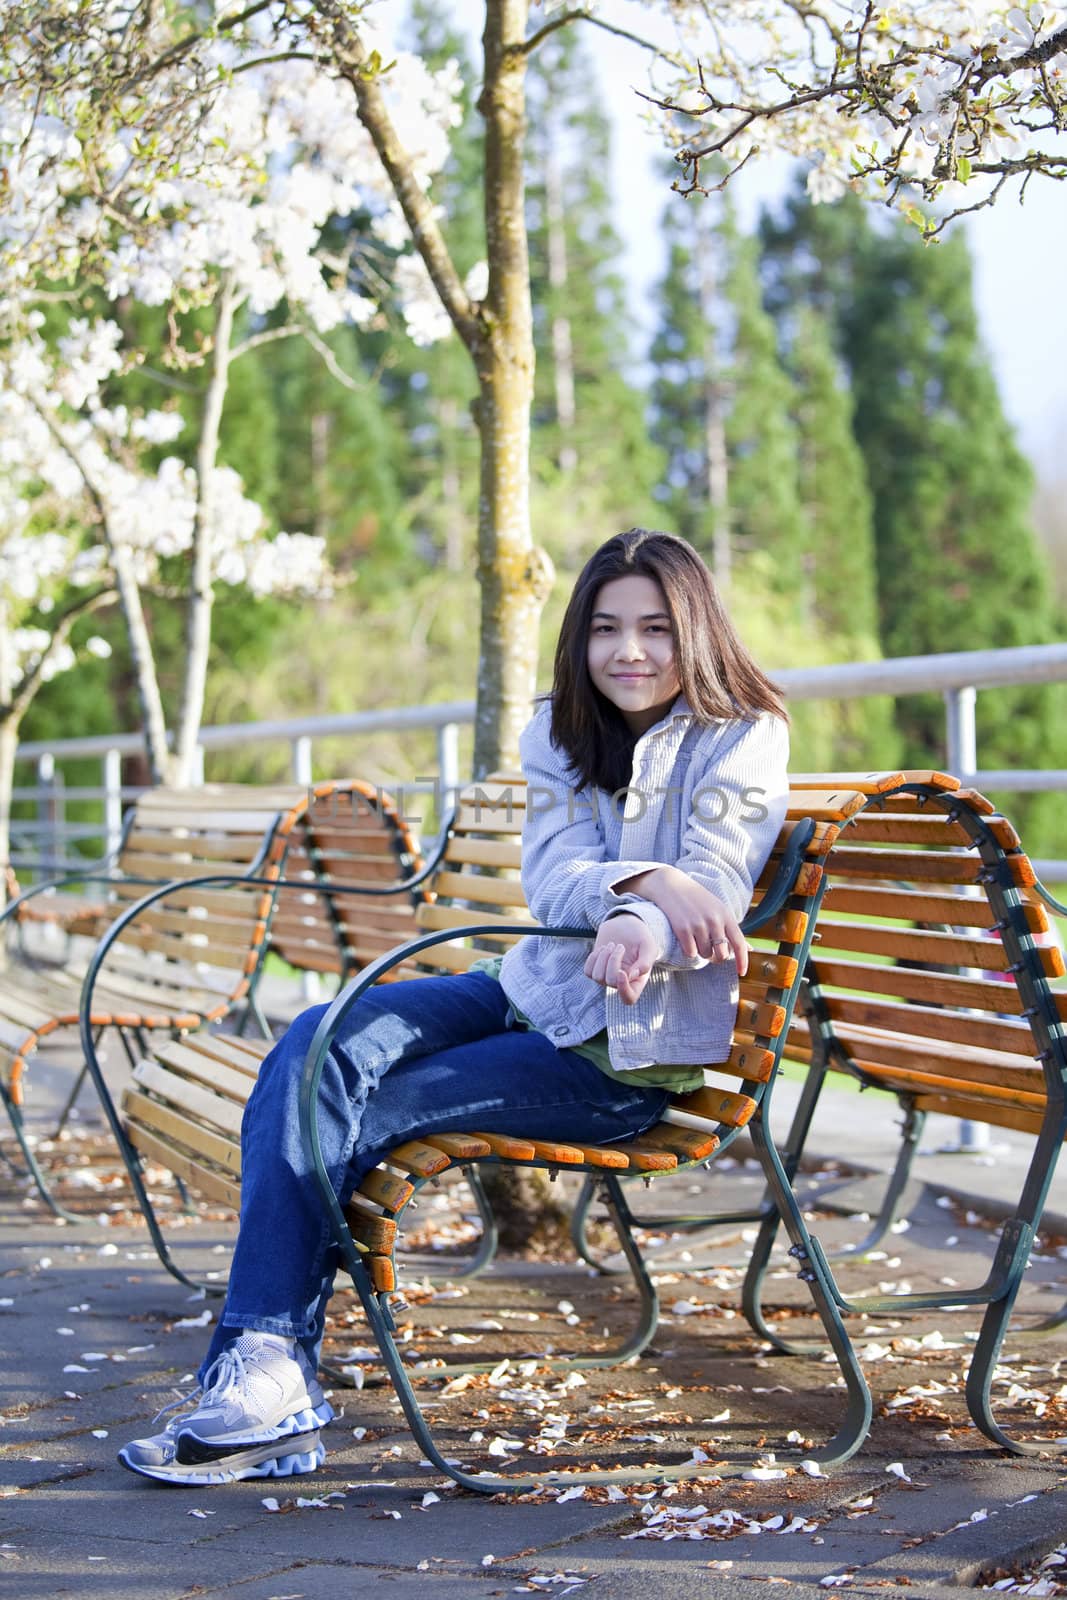 Young teen girl sitting on bench under cherry blossom tree by jarenwicklund